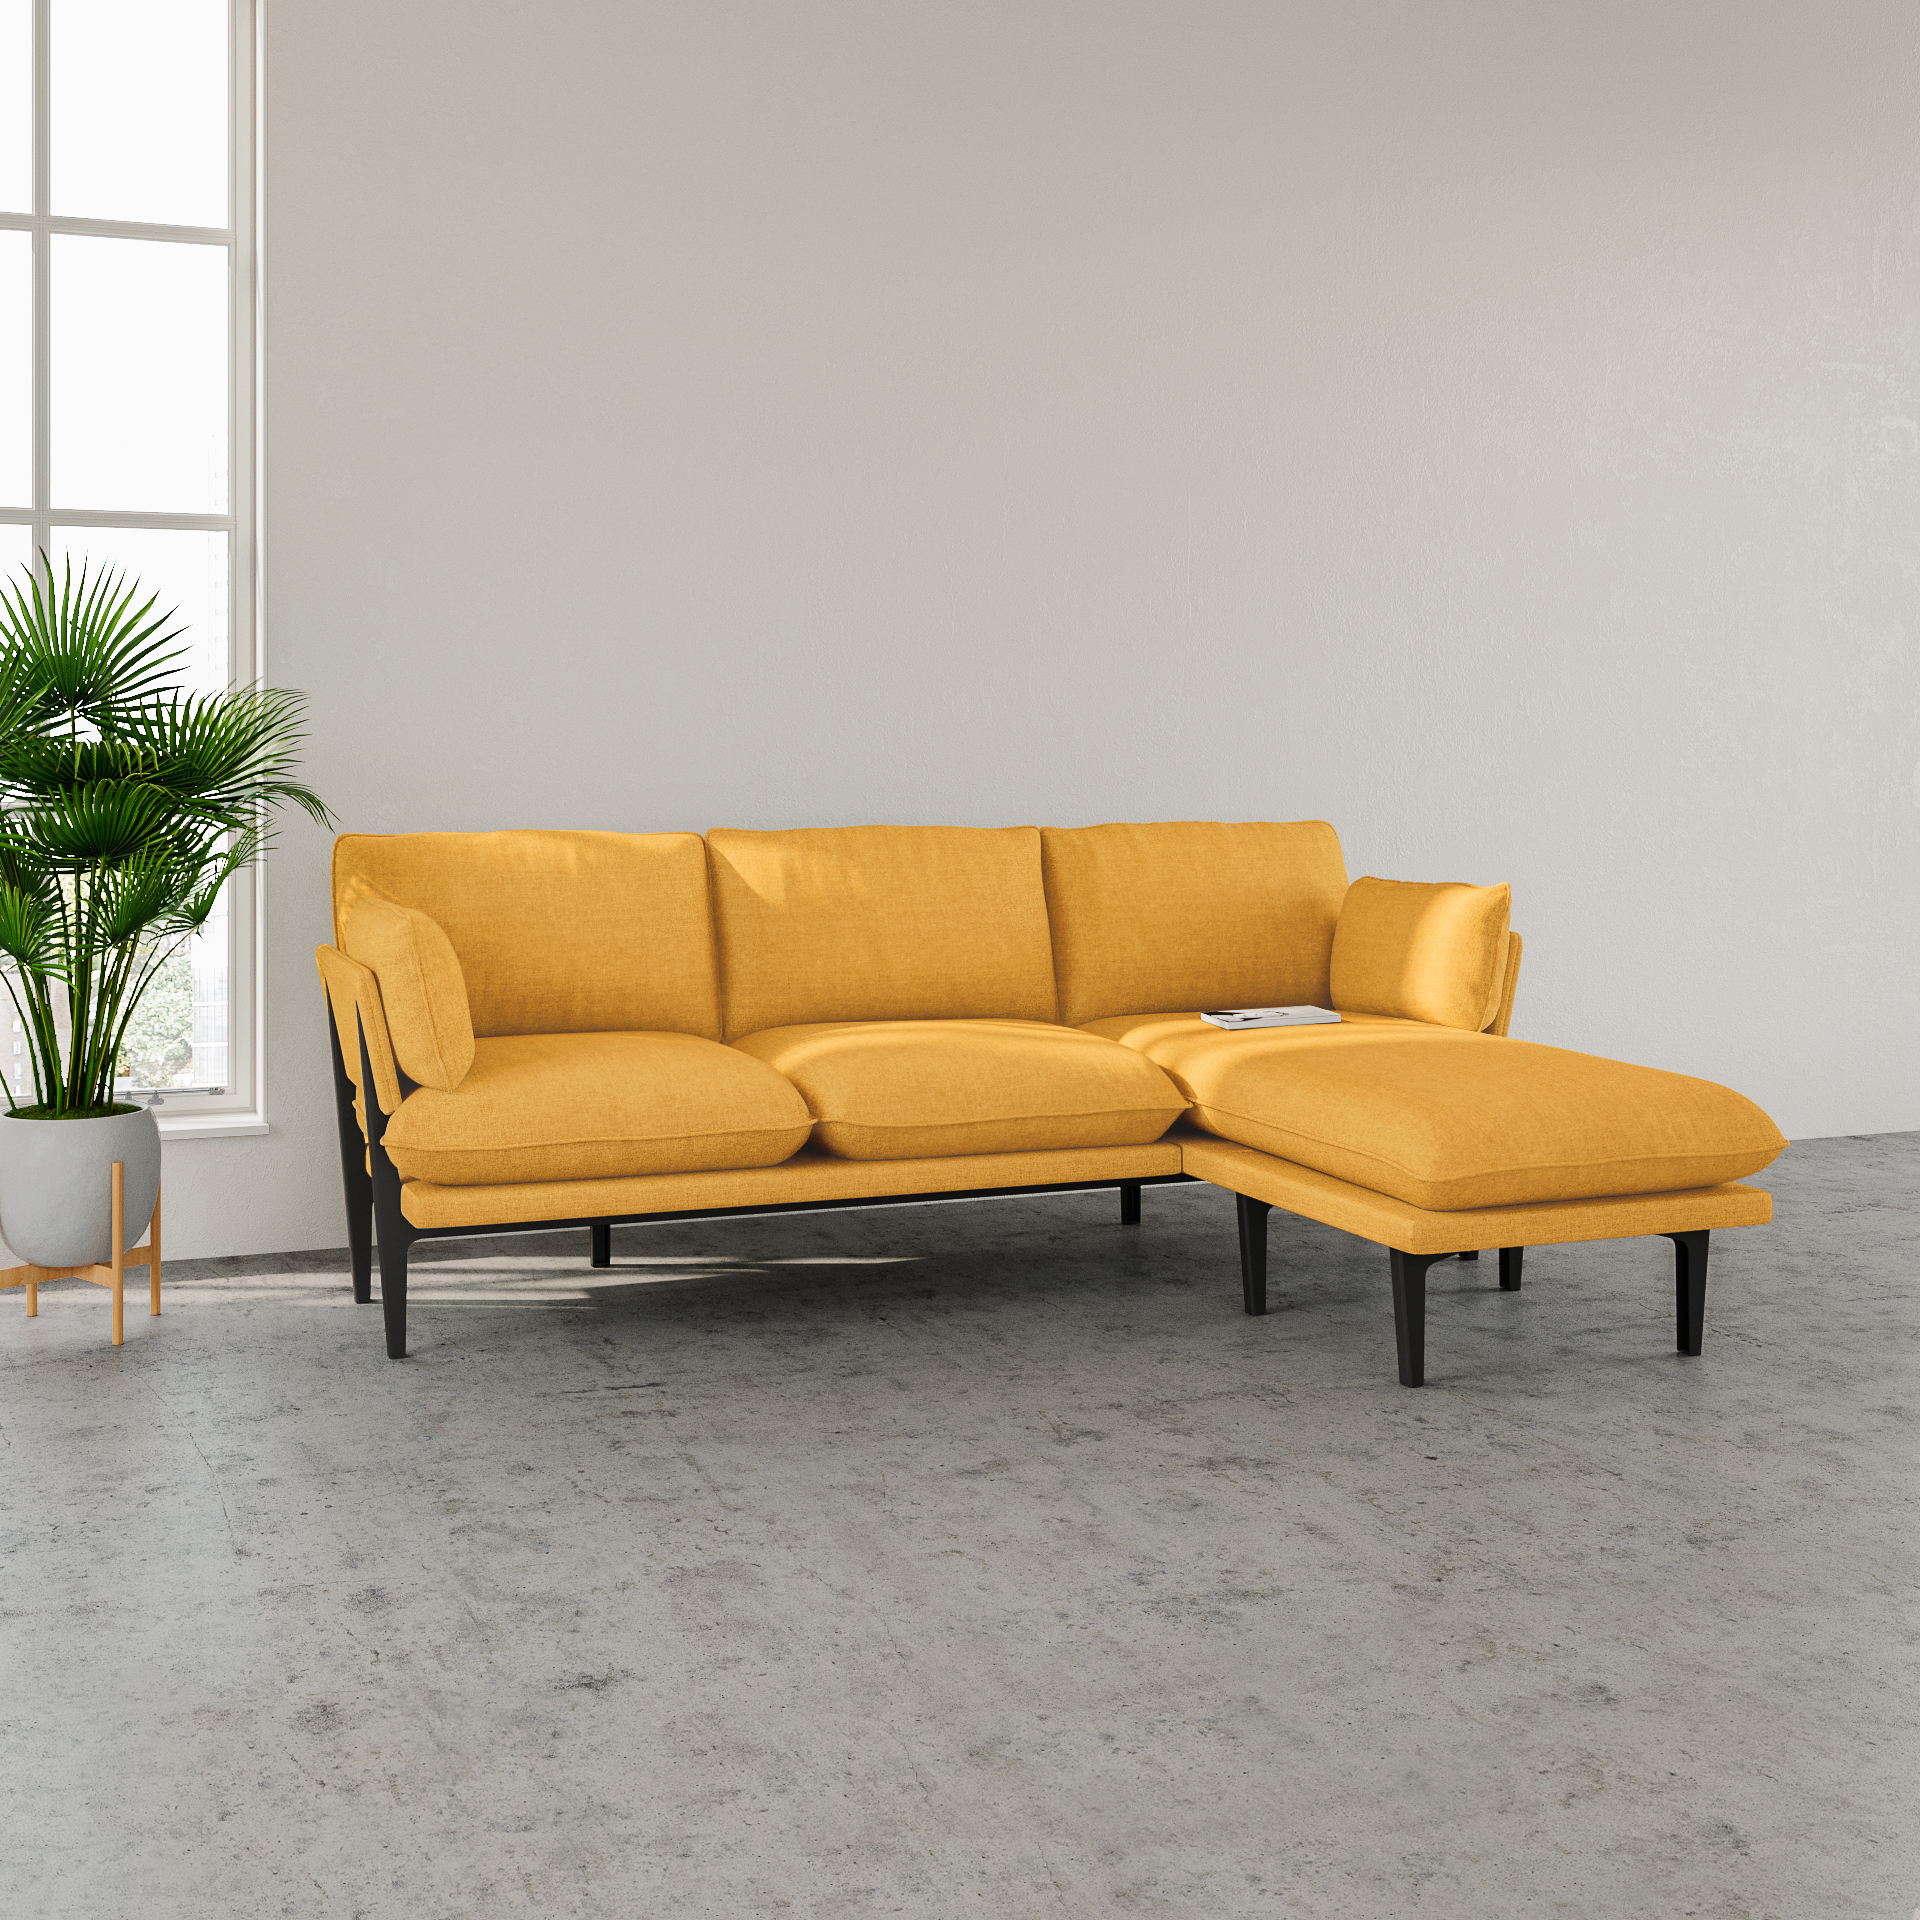 The Floyd Sofa, 3 Seater with chaise, Yellow, Wood Frame | Modern Sofas